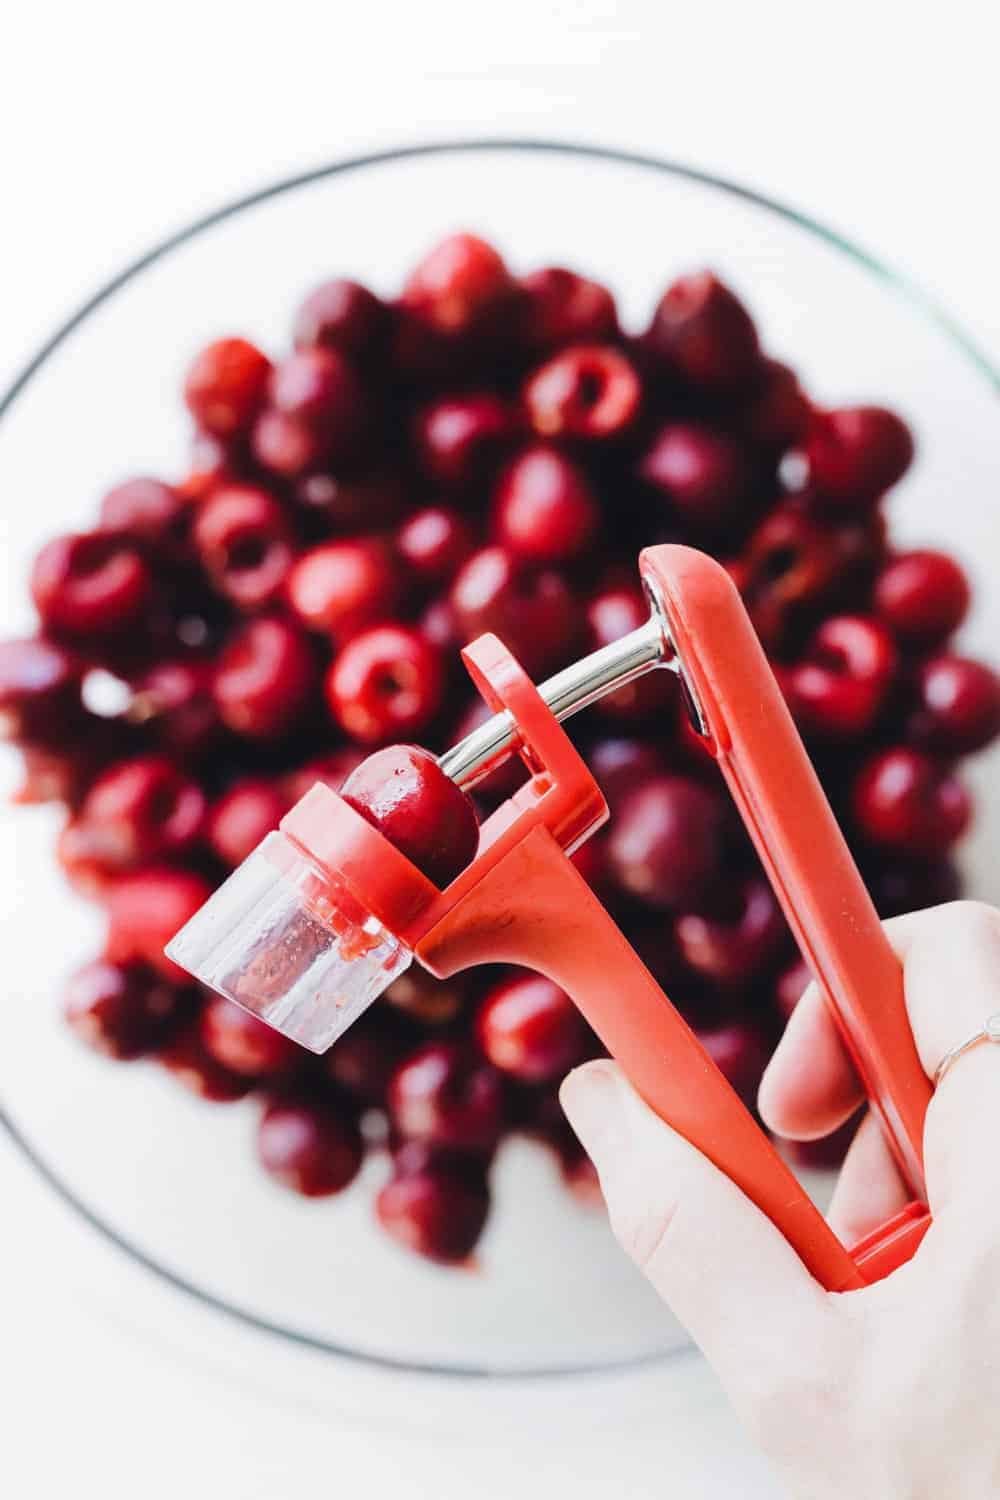 Use fresh or frozen cherries to make Homemade Cherry Pie Filling. Delicious in pies, crisps, or even on waffles for breakfast!